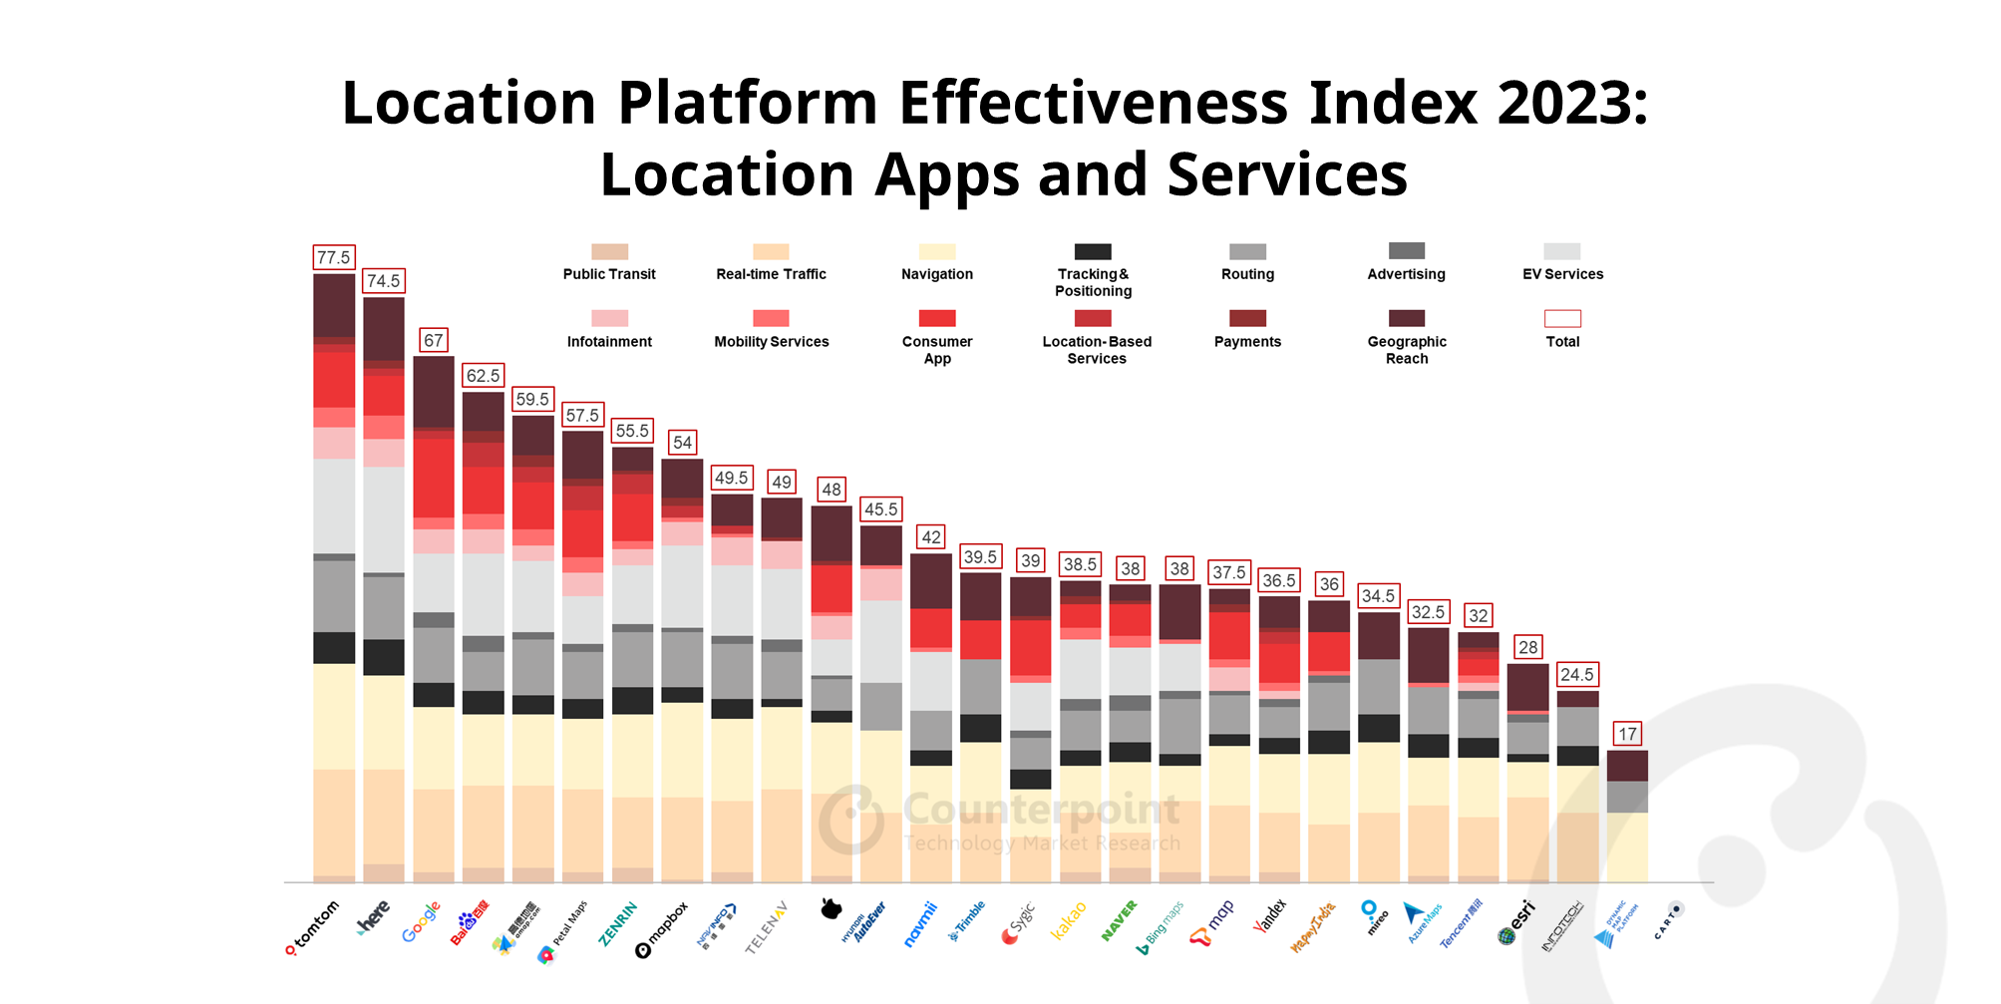 Location Platform Effectiveness Index 2023: Location Apps and Services